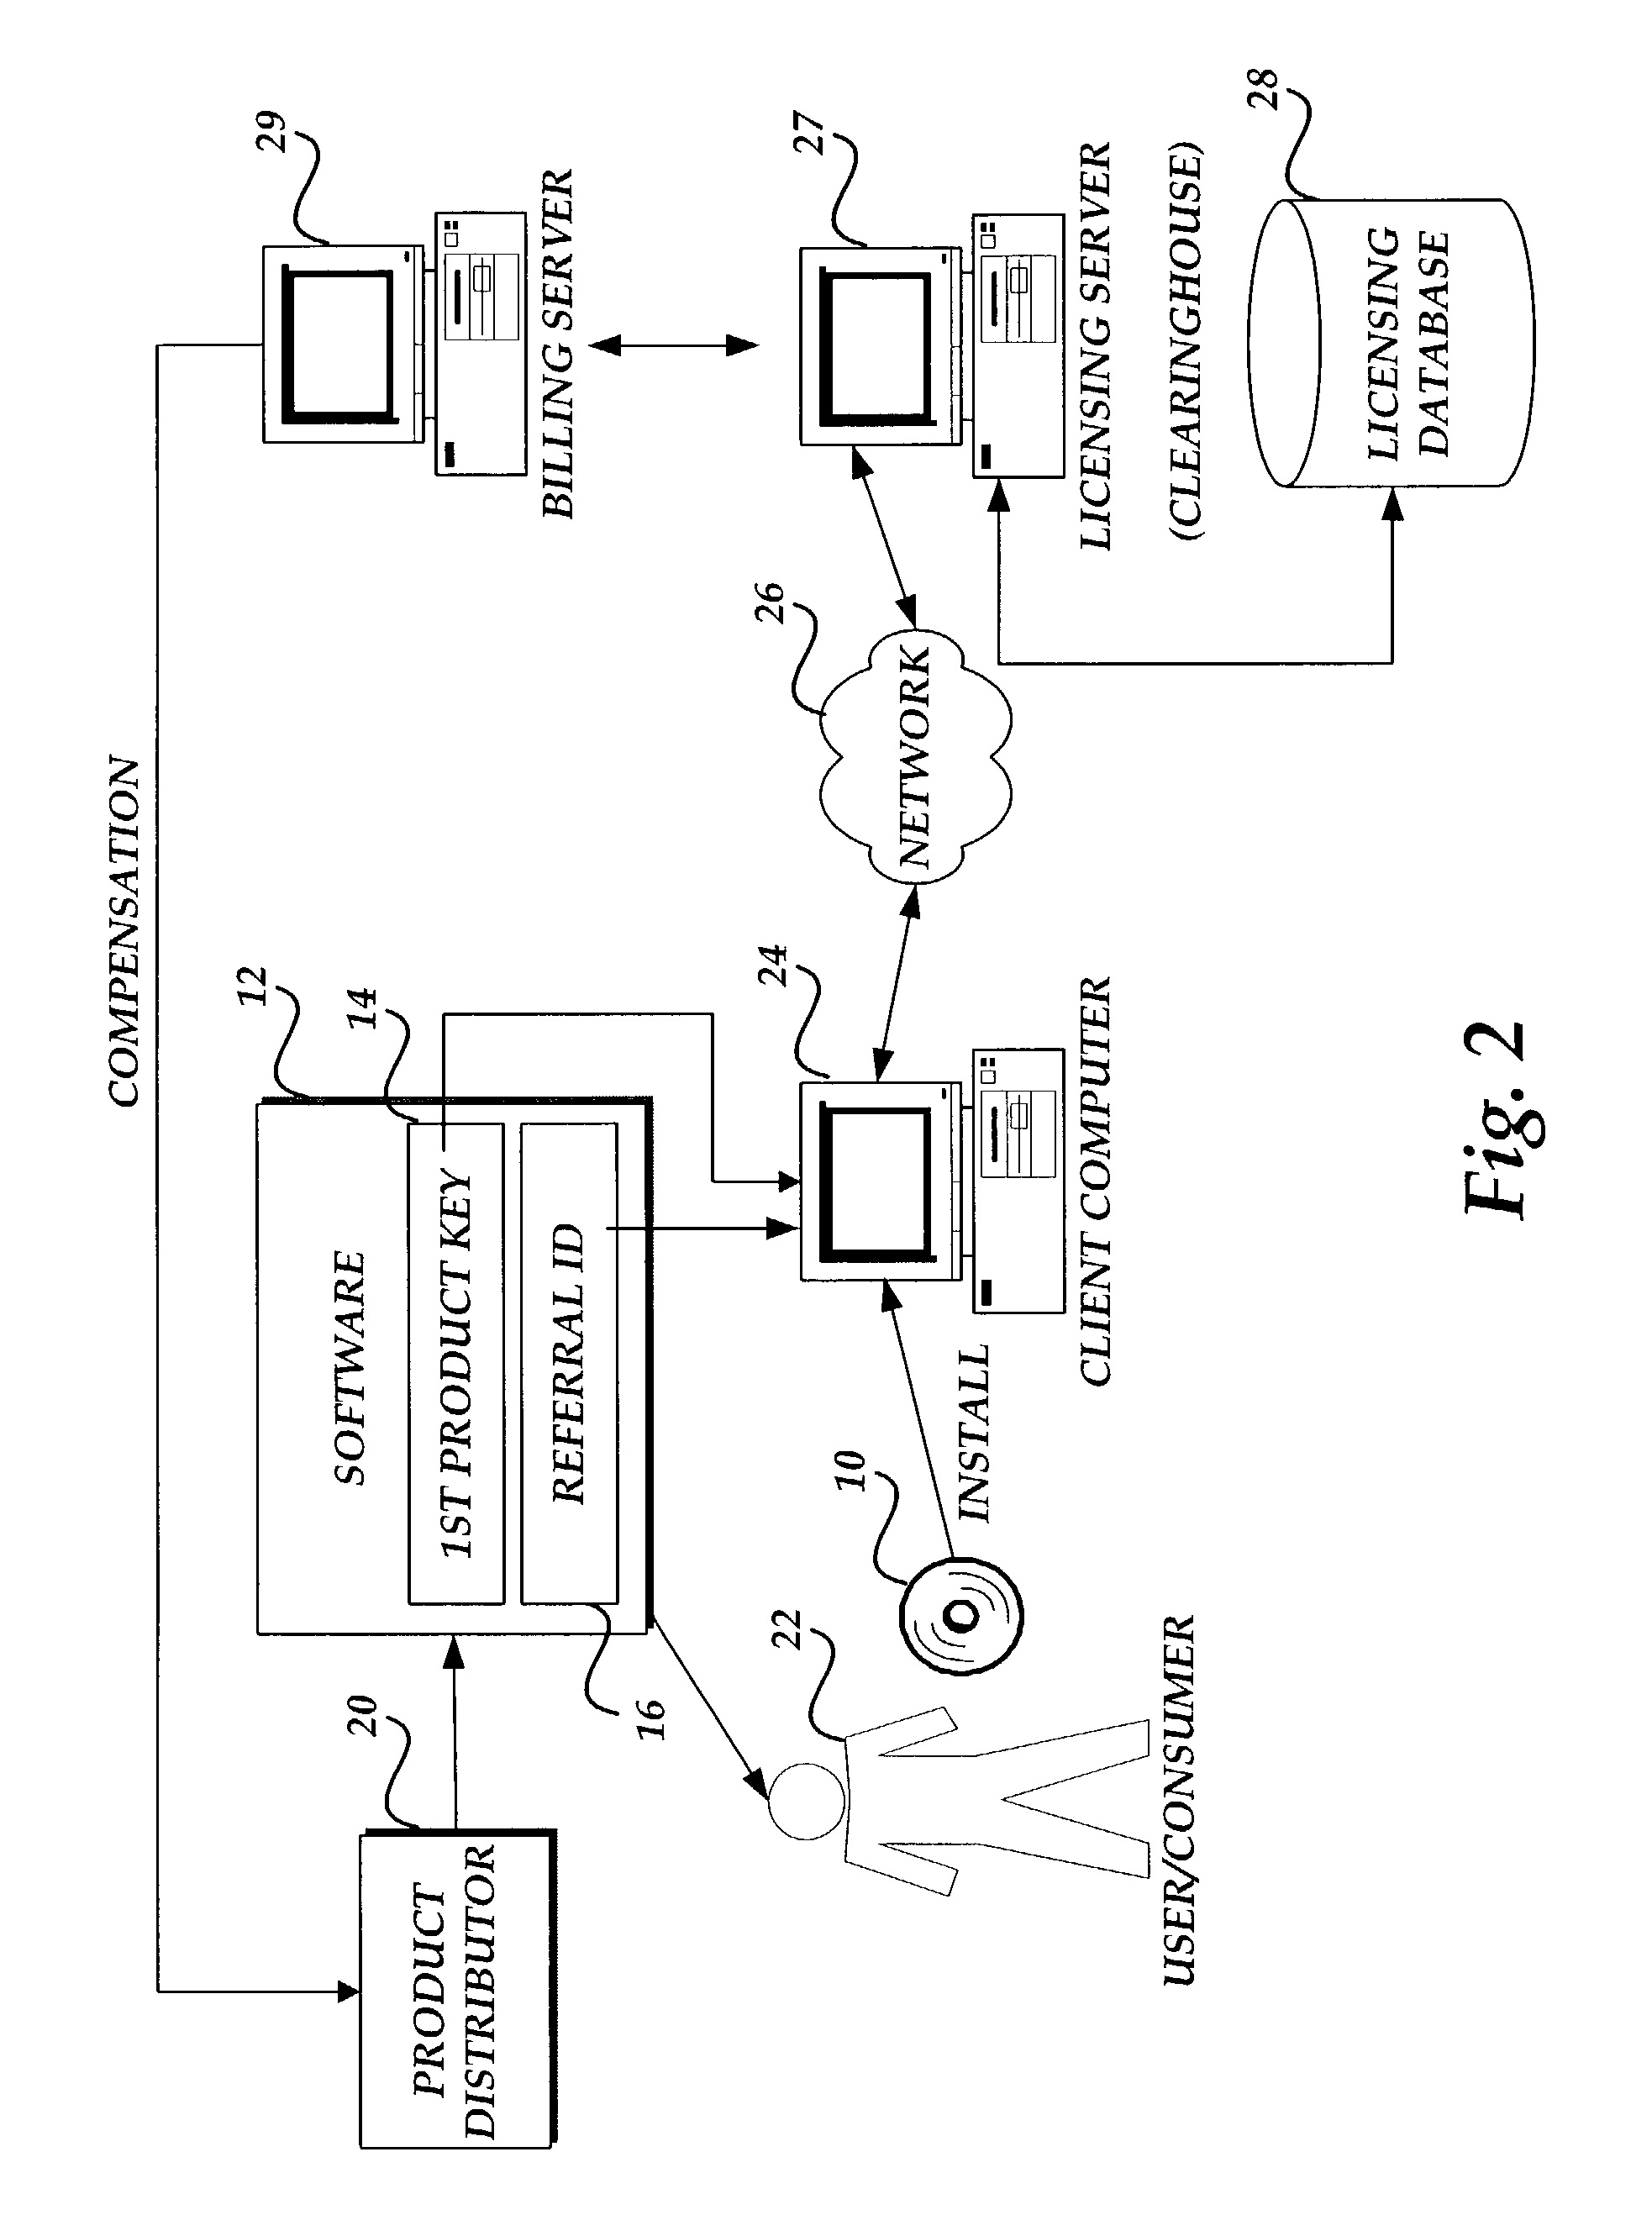 Method, system, apparatus, and computer-readable medium for tracking referrals and product sell-through